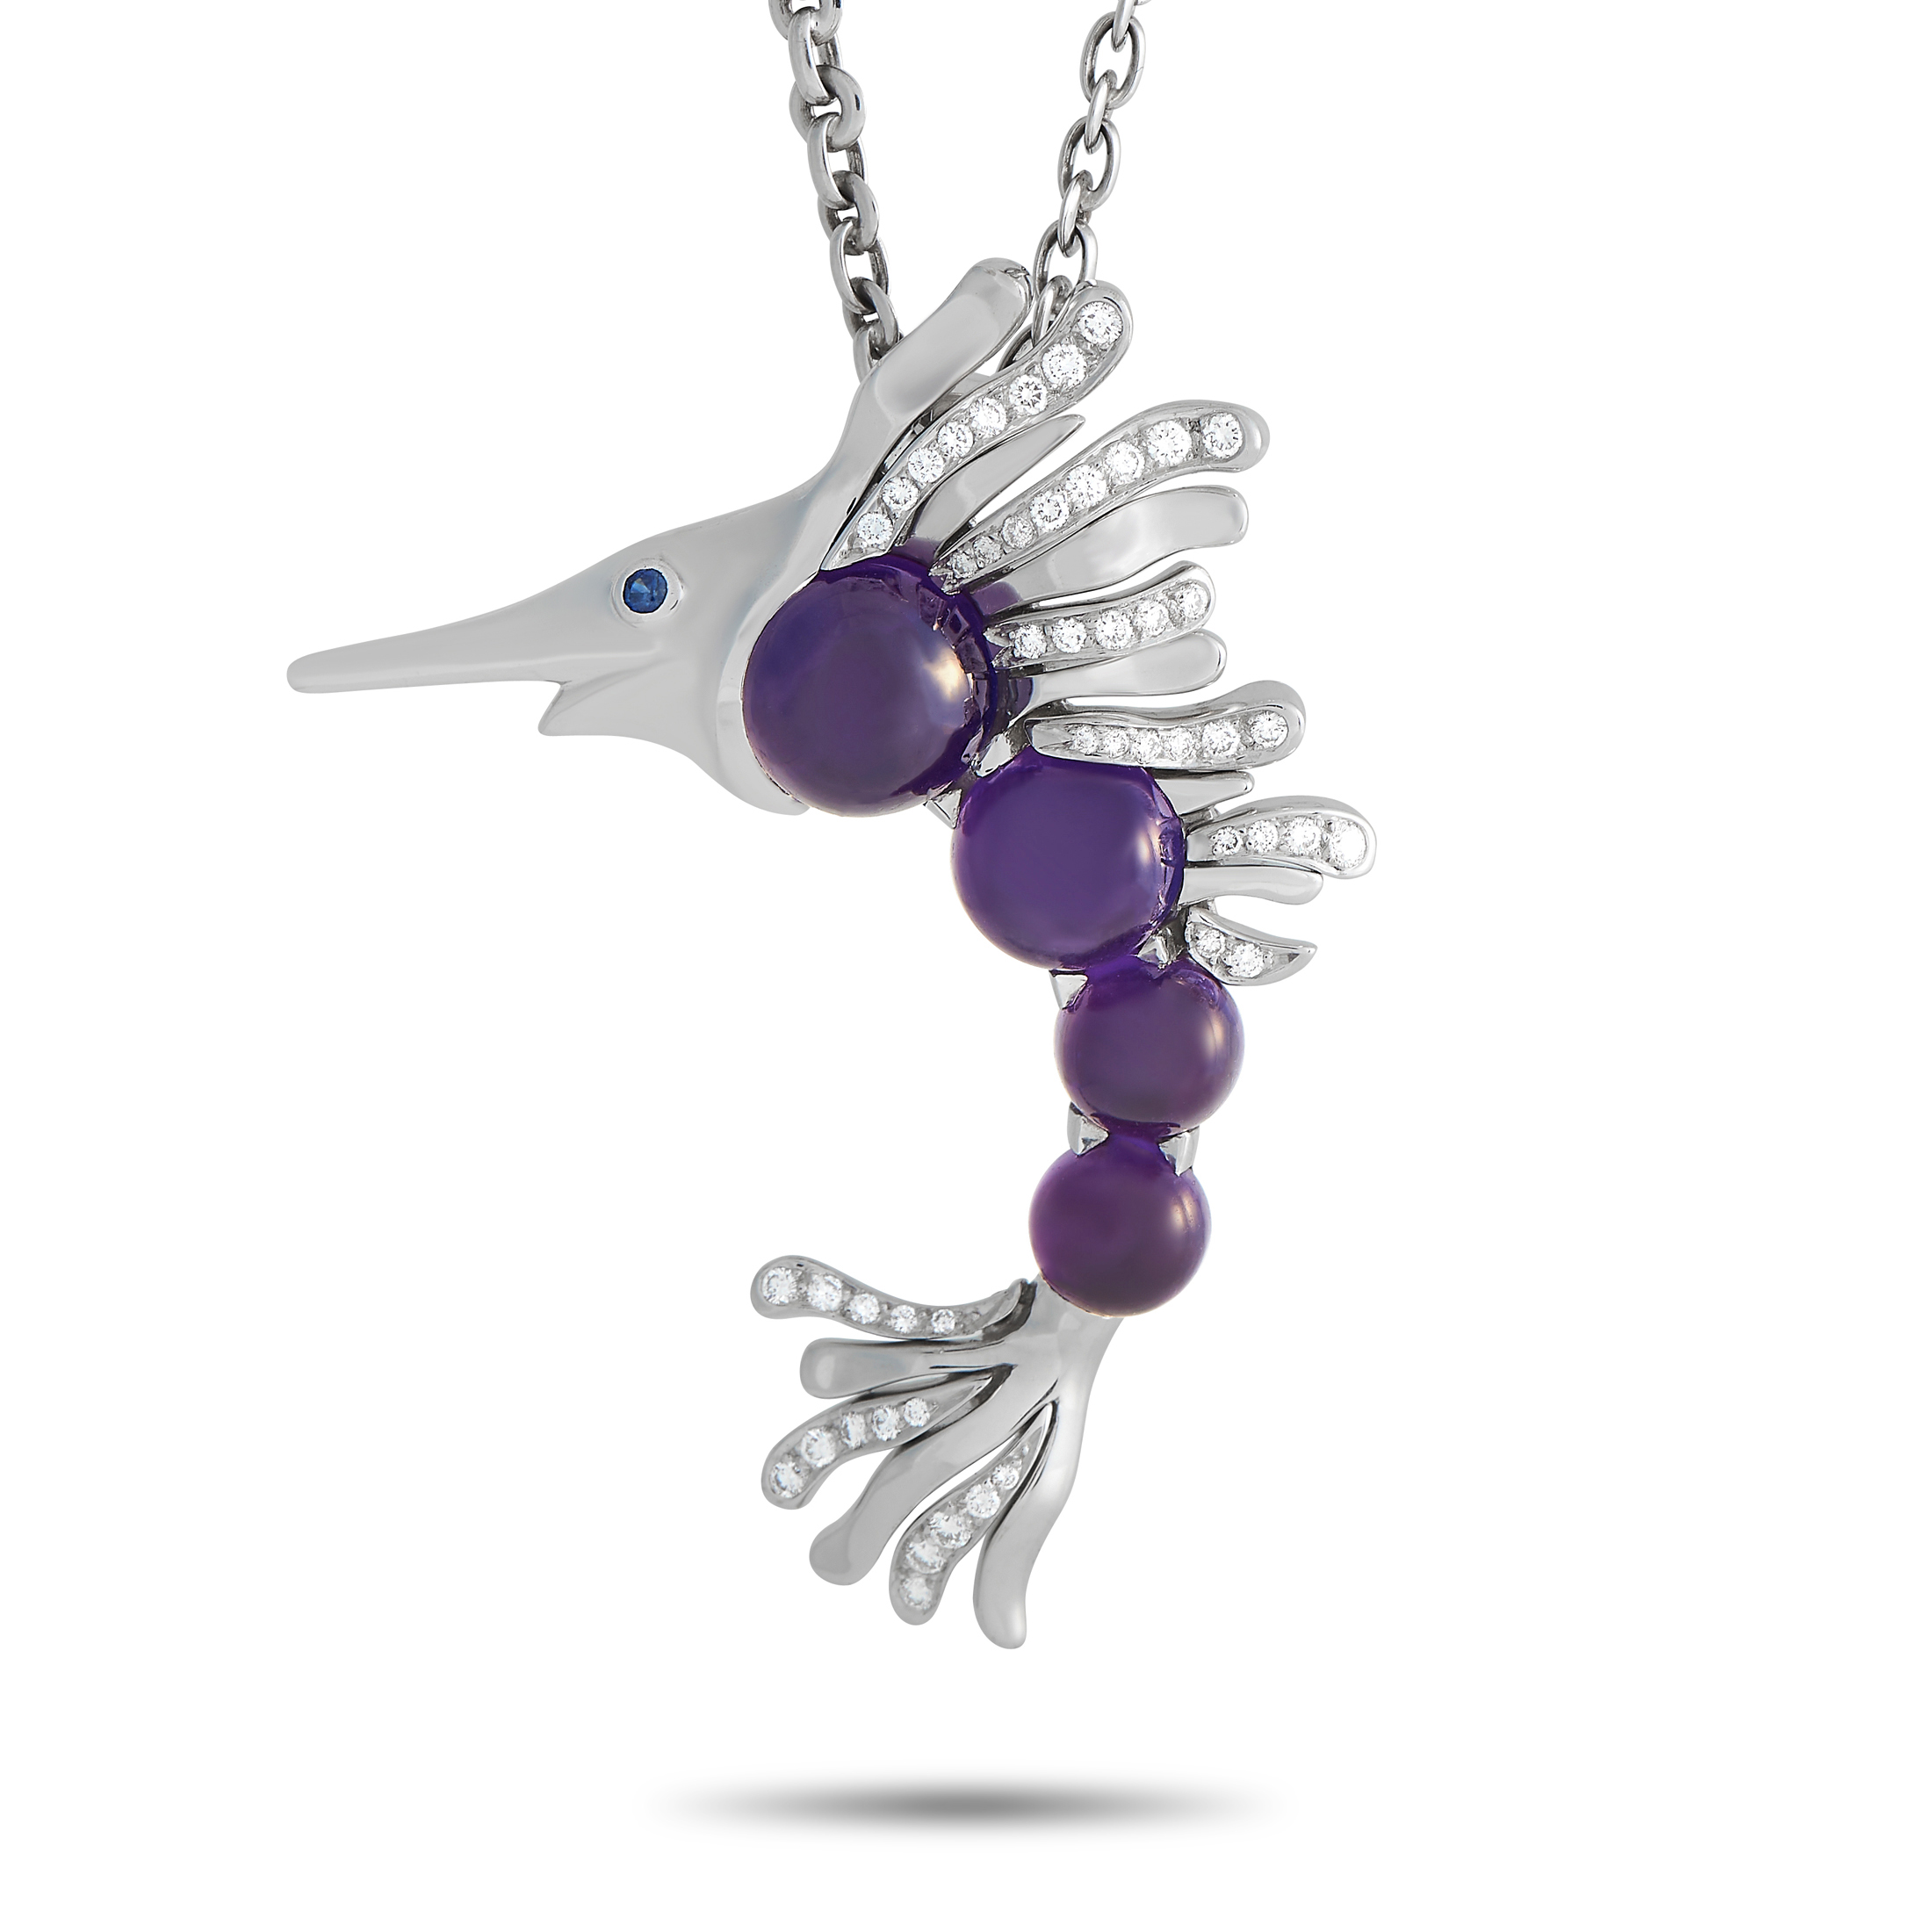 Chanel 18K White Gold 1.25ct Diamond and Amethyst Swordfish Pin and Necklace CN02061118